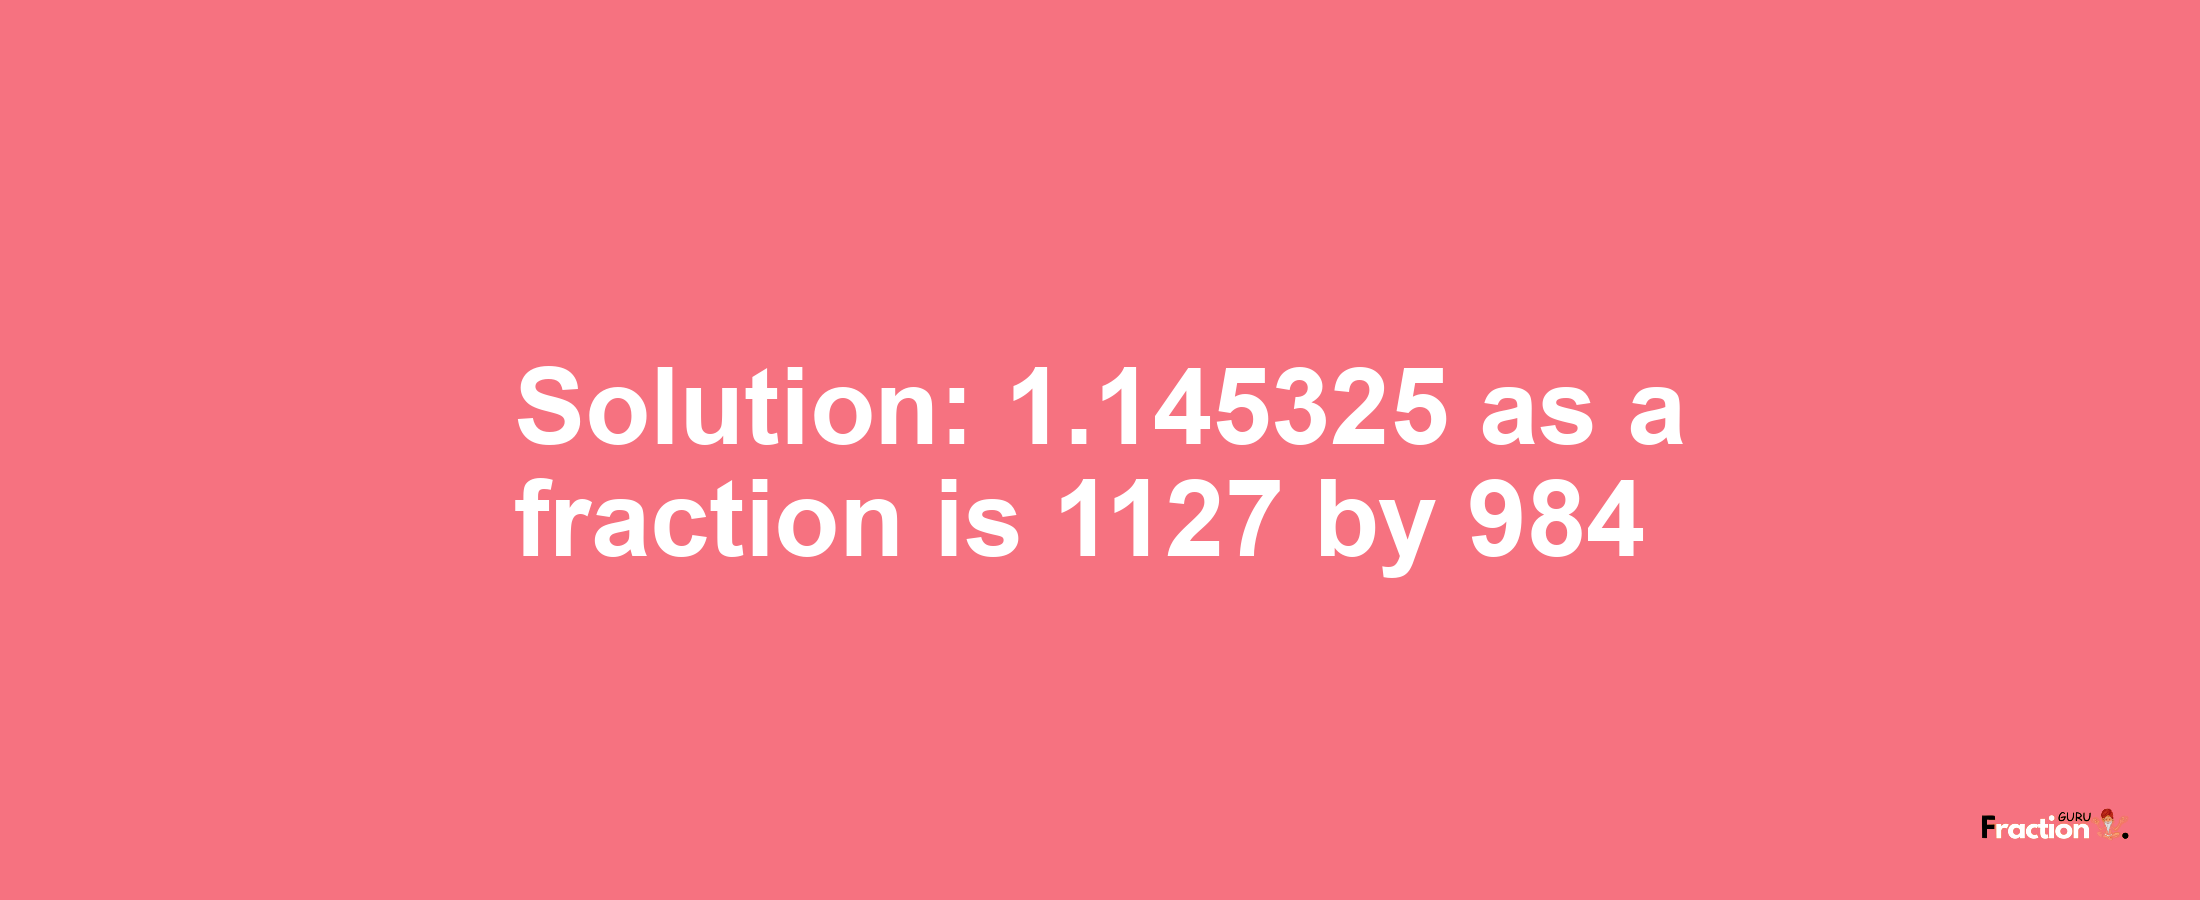 Solution:1.145325 as a fraction is 1127/984